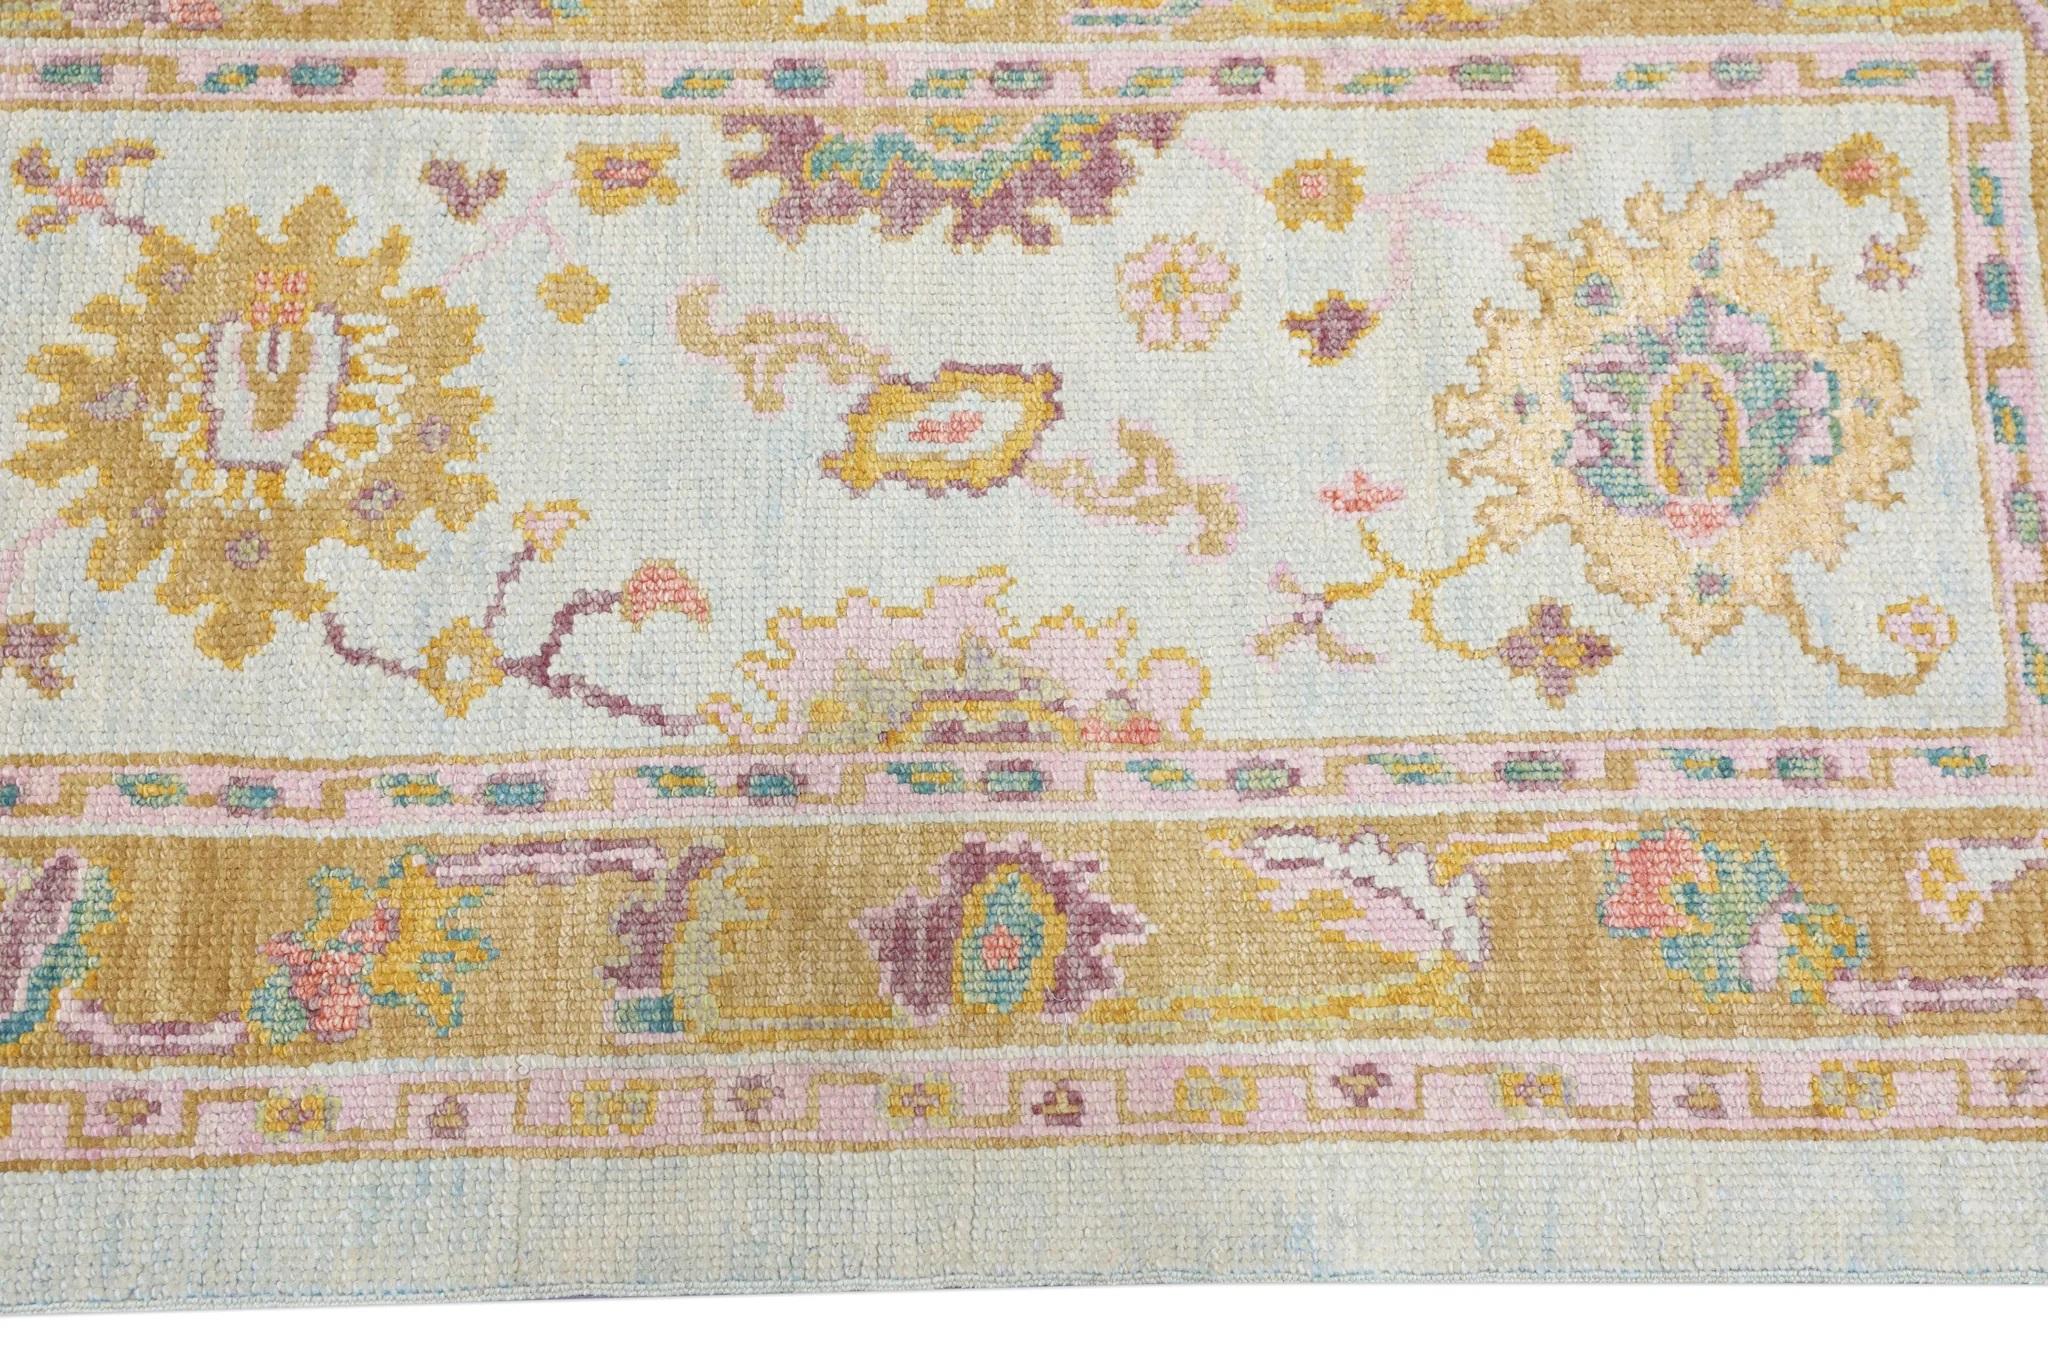 Handwoven Turkish Oushak Rug with Colorful Floral Design 2'10